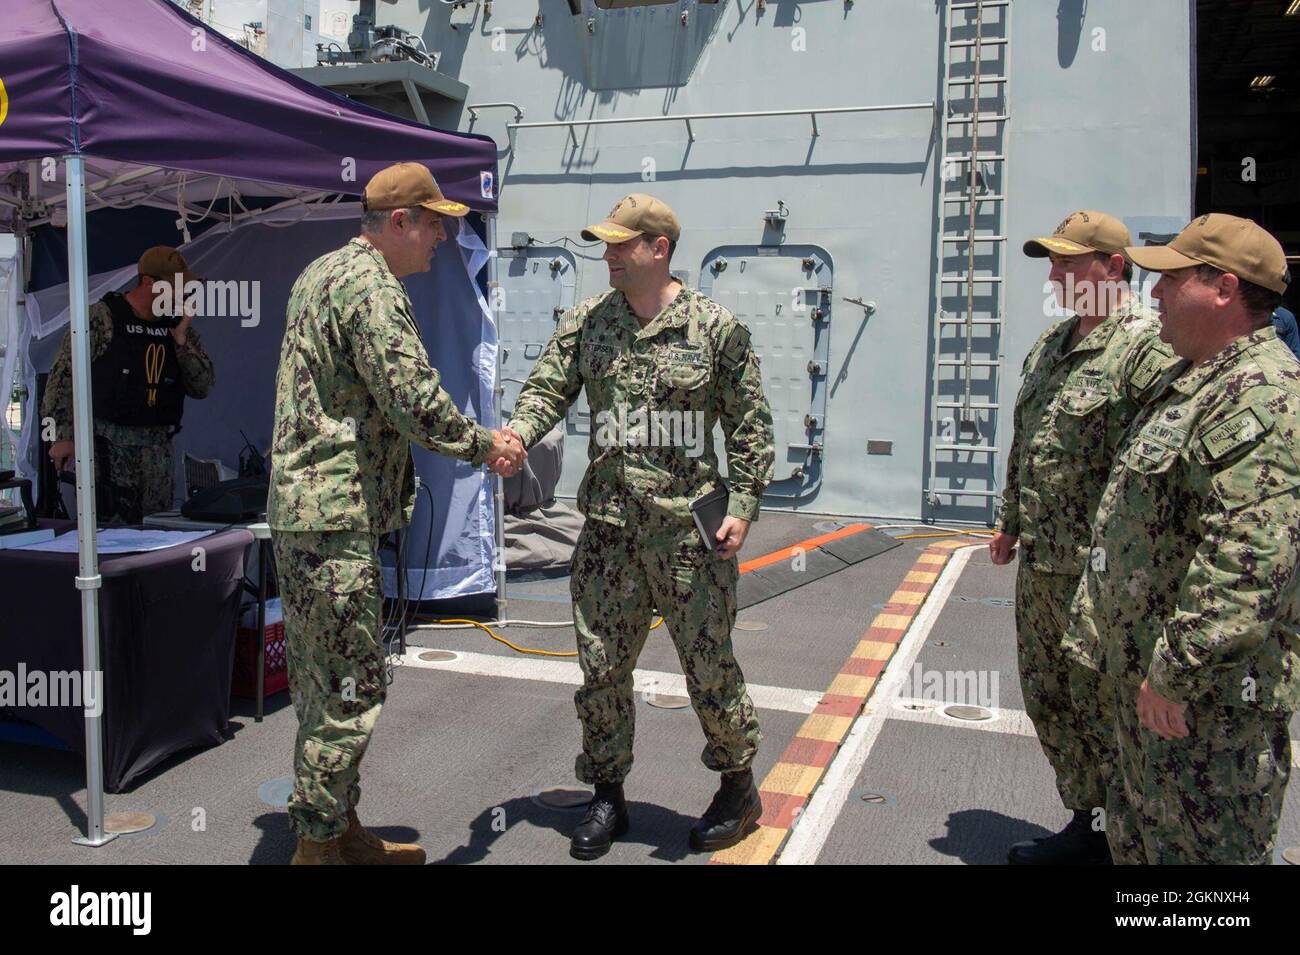 210609-N-ZS023-1008 NAVAL BASE SAN DIEGO (JUNE 8, 2021) Cmdr. Jeremiah Petersen, center, commanding officer of Freedom-variant littoral combat ship USS Fort Worth (LCS 3), greets Capt. Gregory Thier, left, Force Surgeon, Naval Surface Force, U.S. Pacific Fleet, for a scheduled tour. The LCS is a fast, agile, mission-focused platform designed to operate in near-shore environments, winning against 21st-century coastal threats. Stock Photo